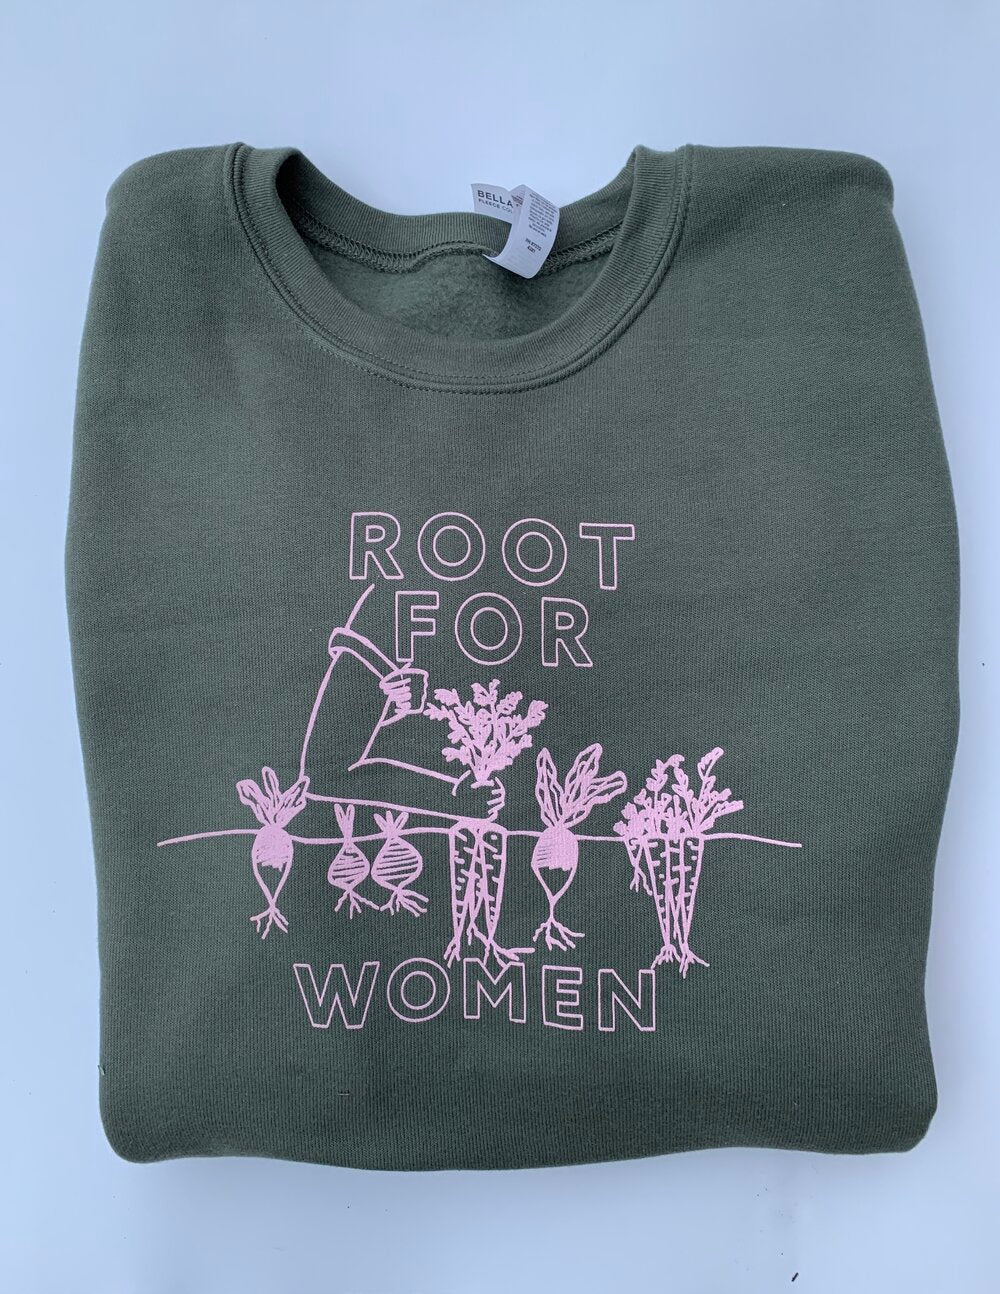 A folded green crewneck reads "Root for Women" in white block letters with a garden illustration